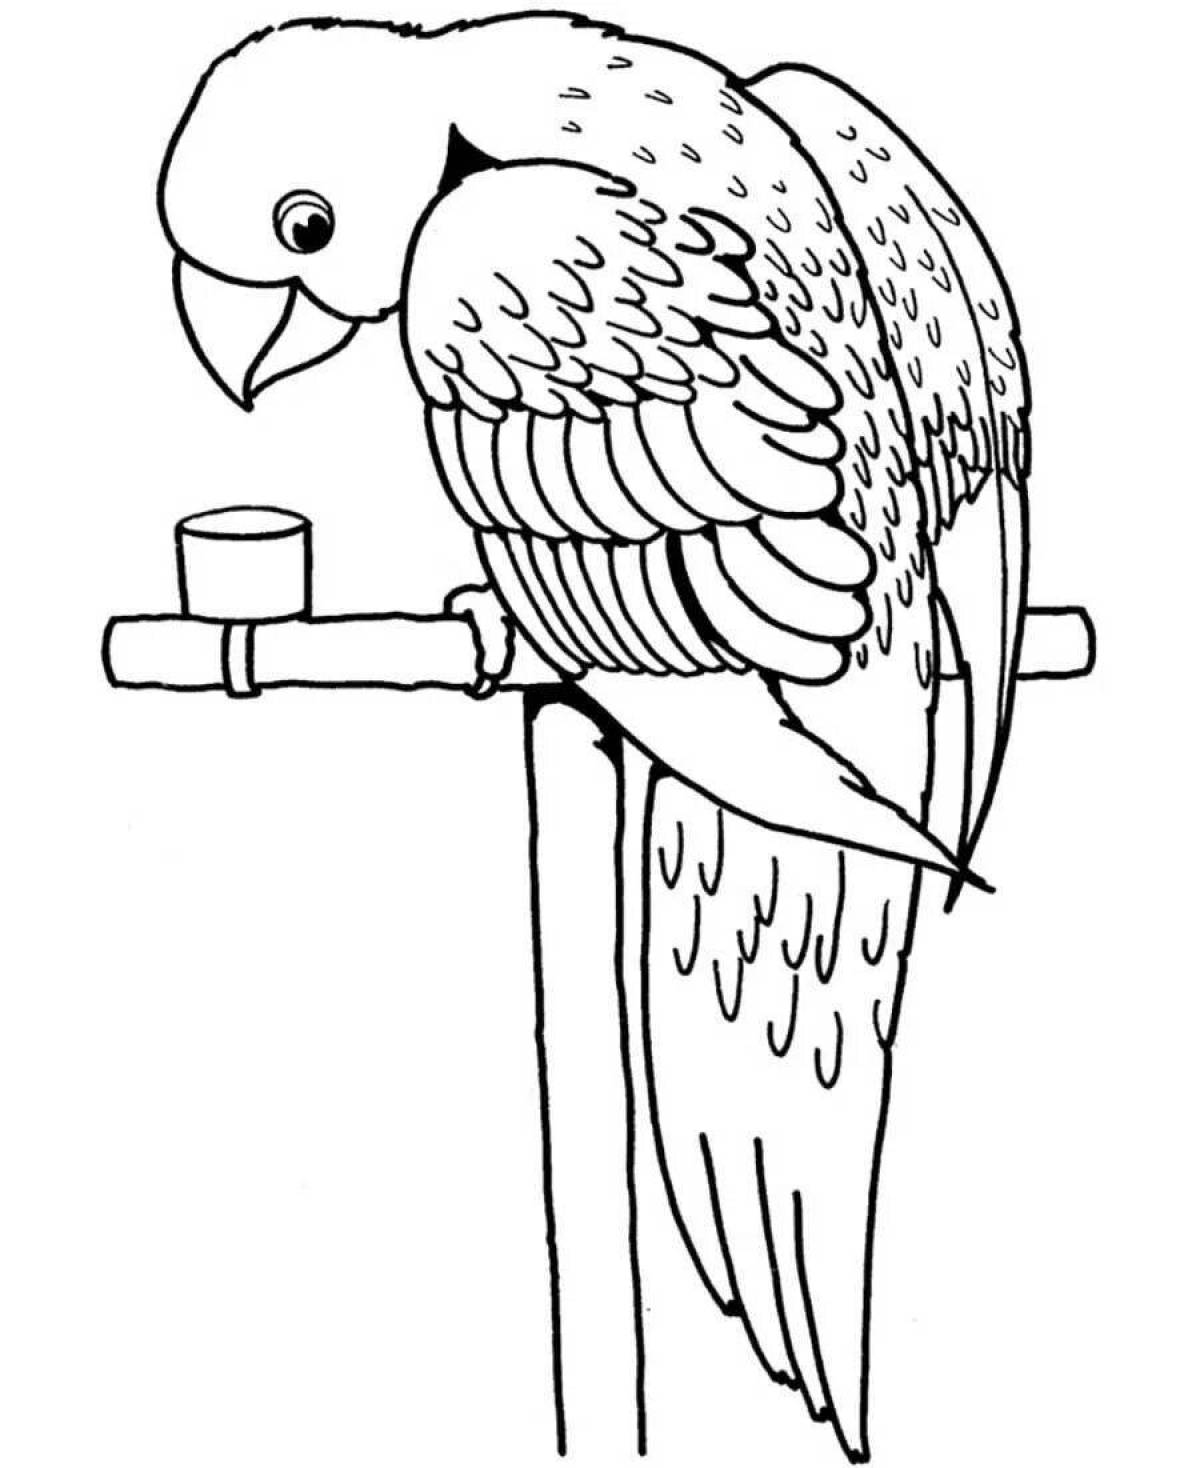 Coloring page dazzling parrot for children 6-7 years old